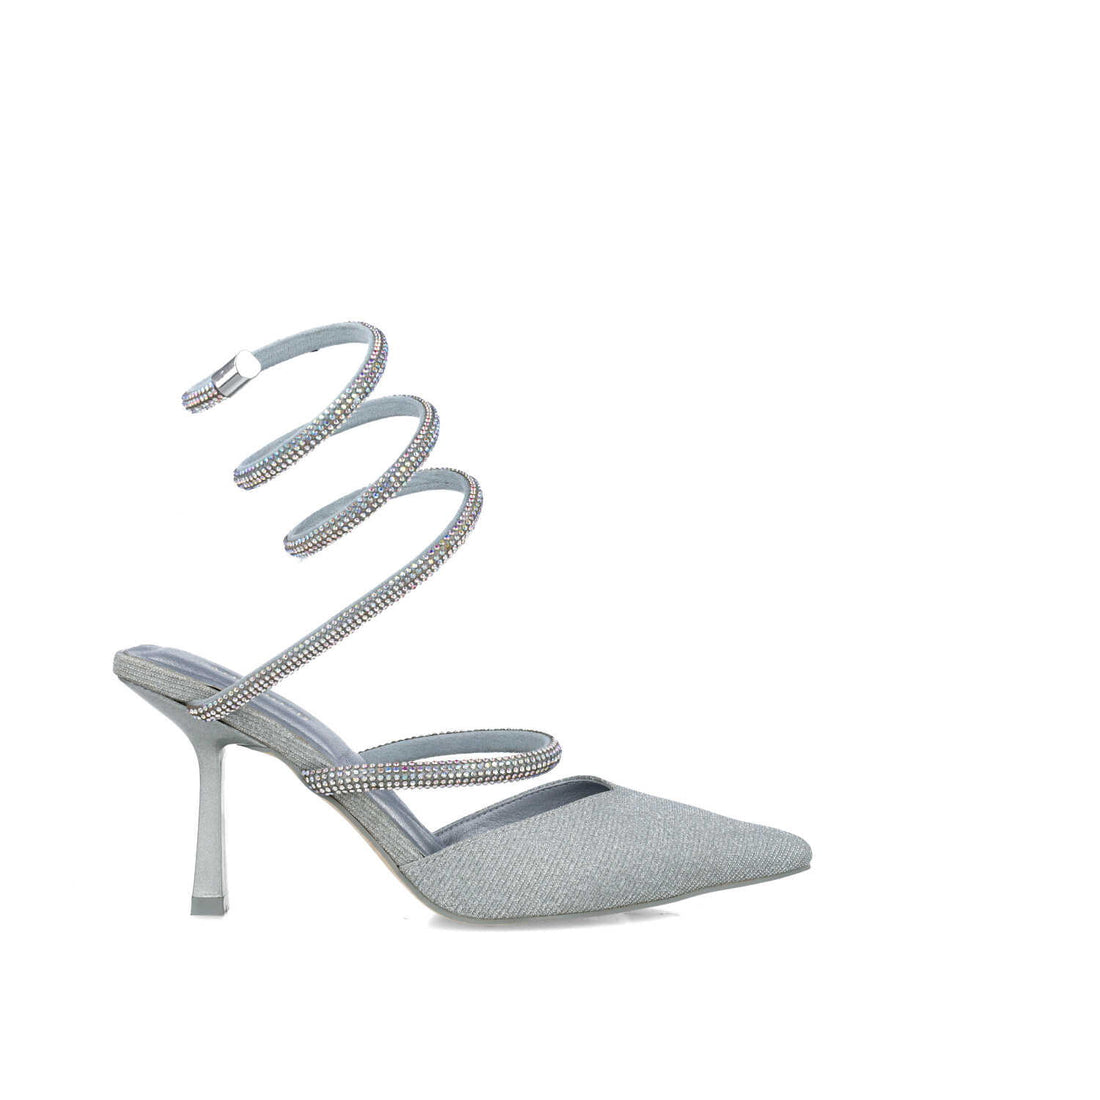 Silver Pumps With Wrap Around Strap_24716_09_01